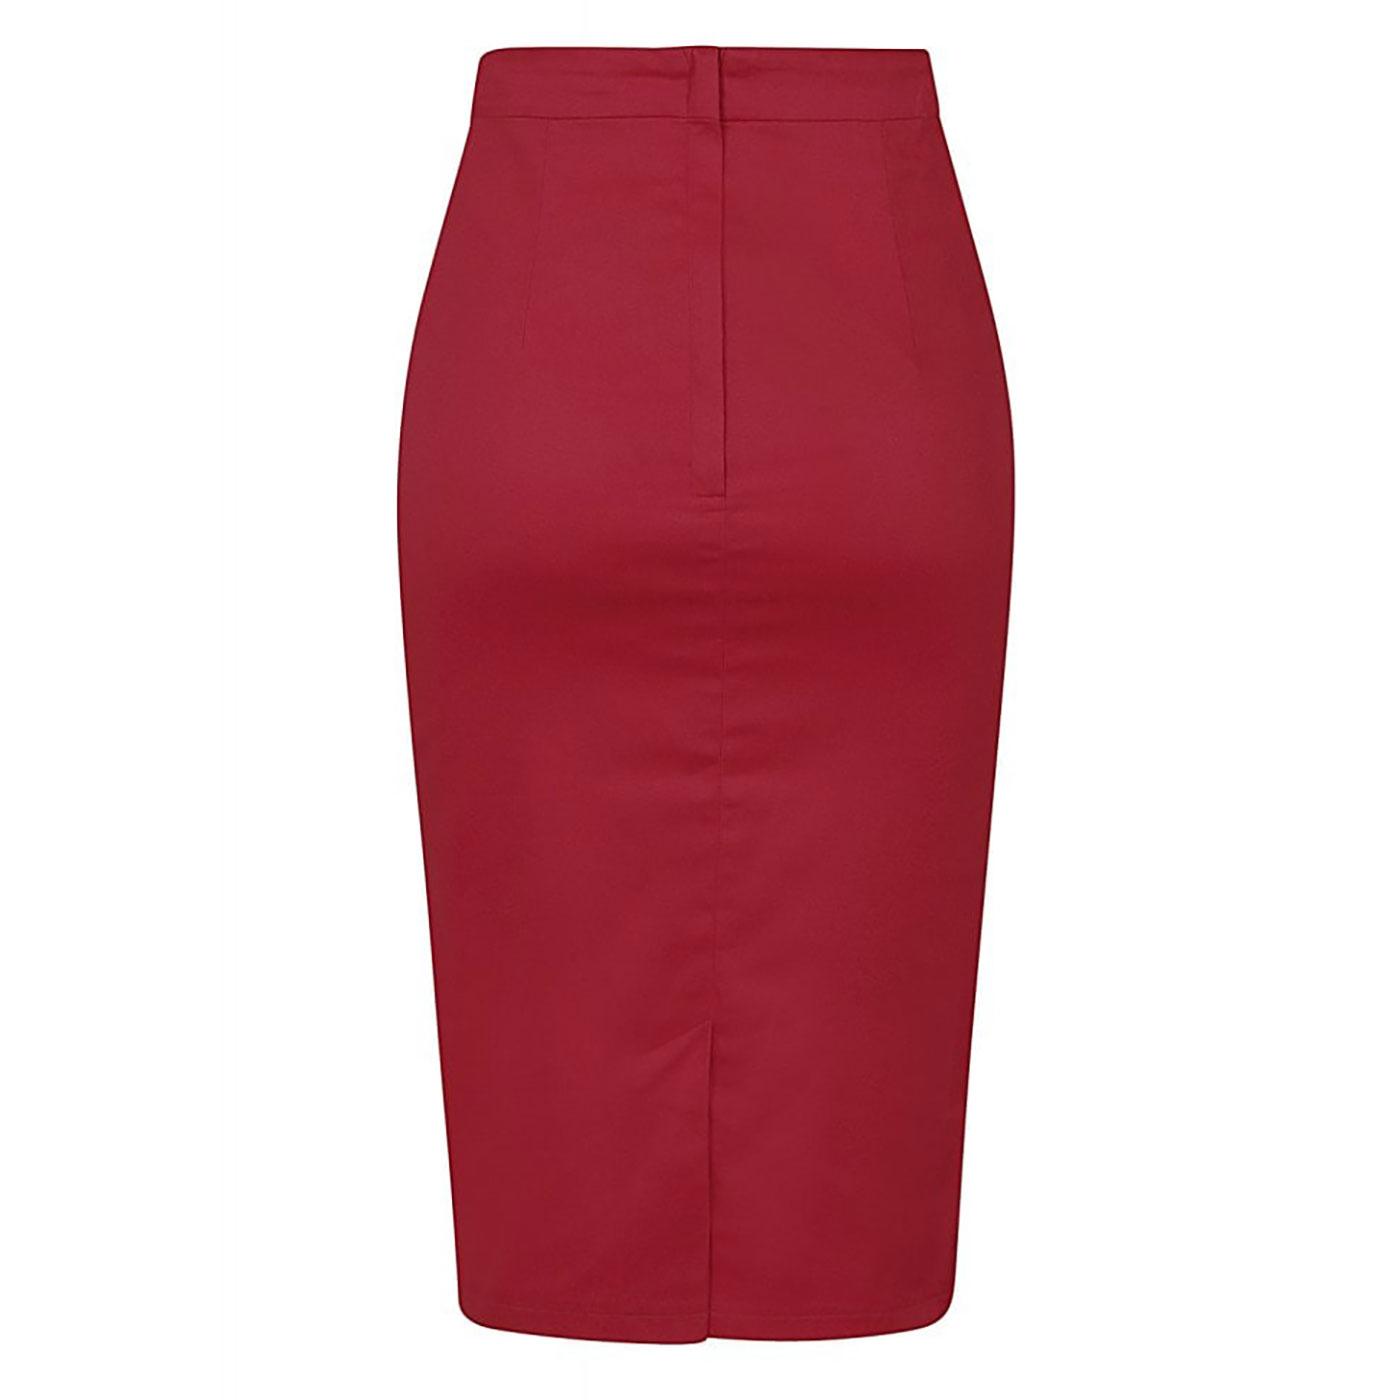 COLLECTIF Bettina Retro 50s Vintage Red Pencil Skirt